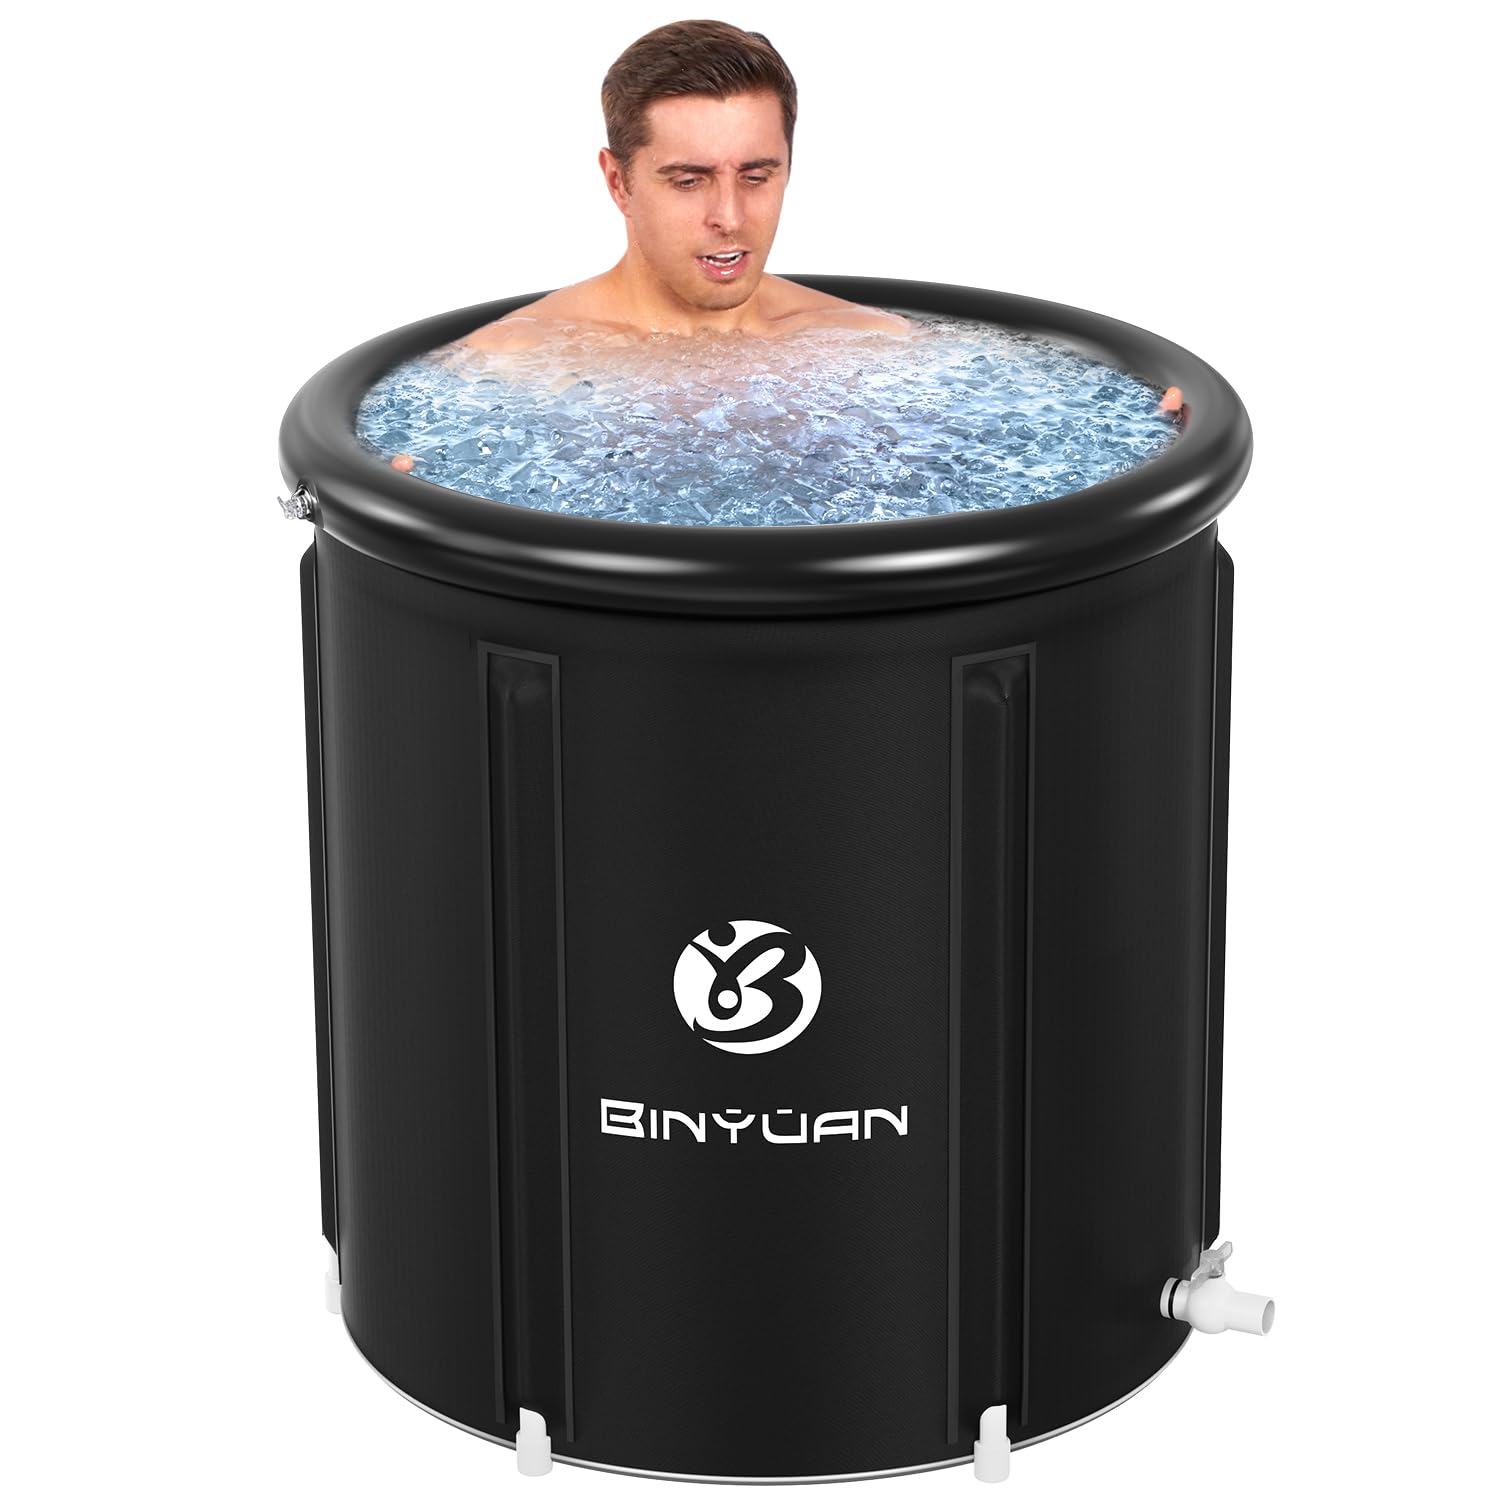 XL Ice Bath Tub for Athletes With Cover 106 Gallons Cold Plunge Tub for Recovery, BINYUAN Portable Ice Bath Plunge Pool Suitable for Family Gardens, Gyms, Arena and Other Cold Water Therapy Training